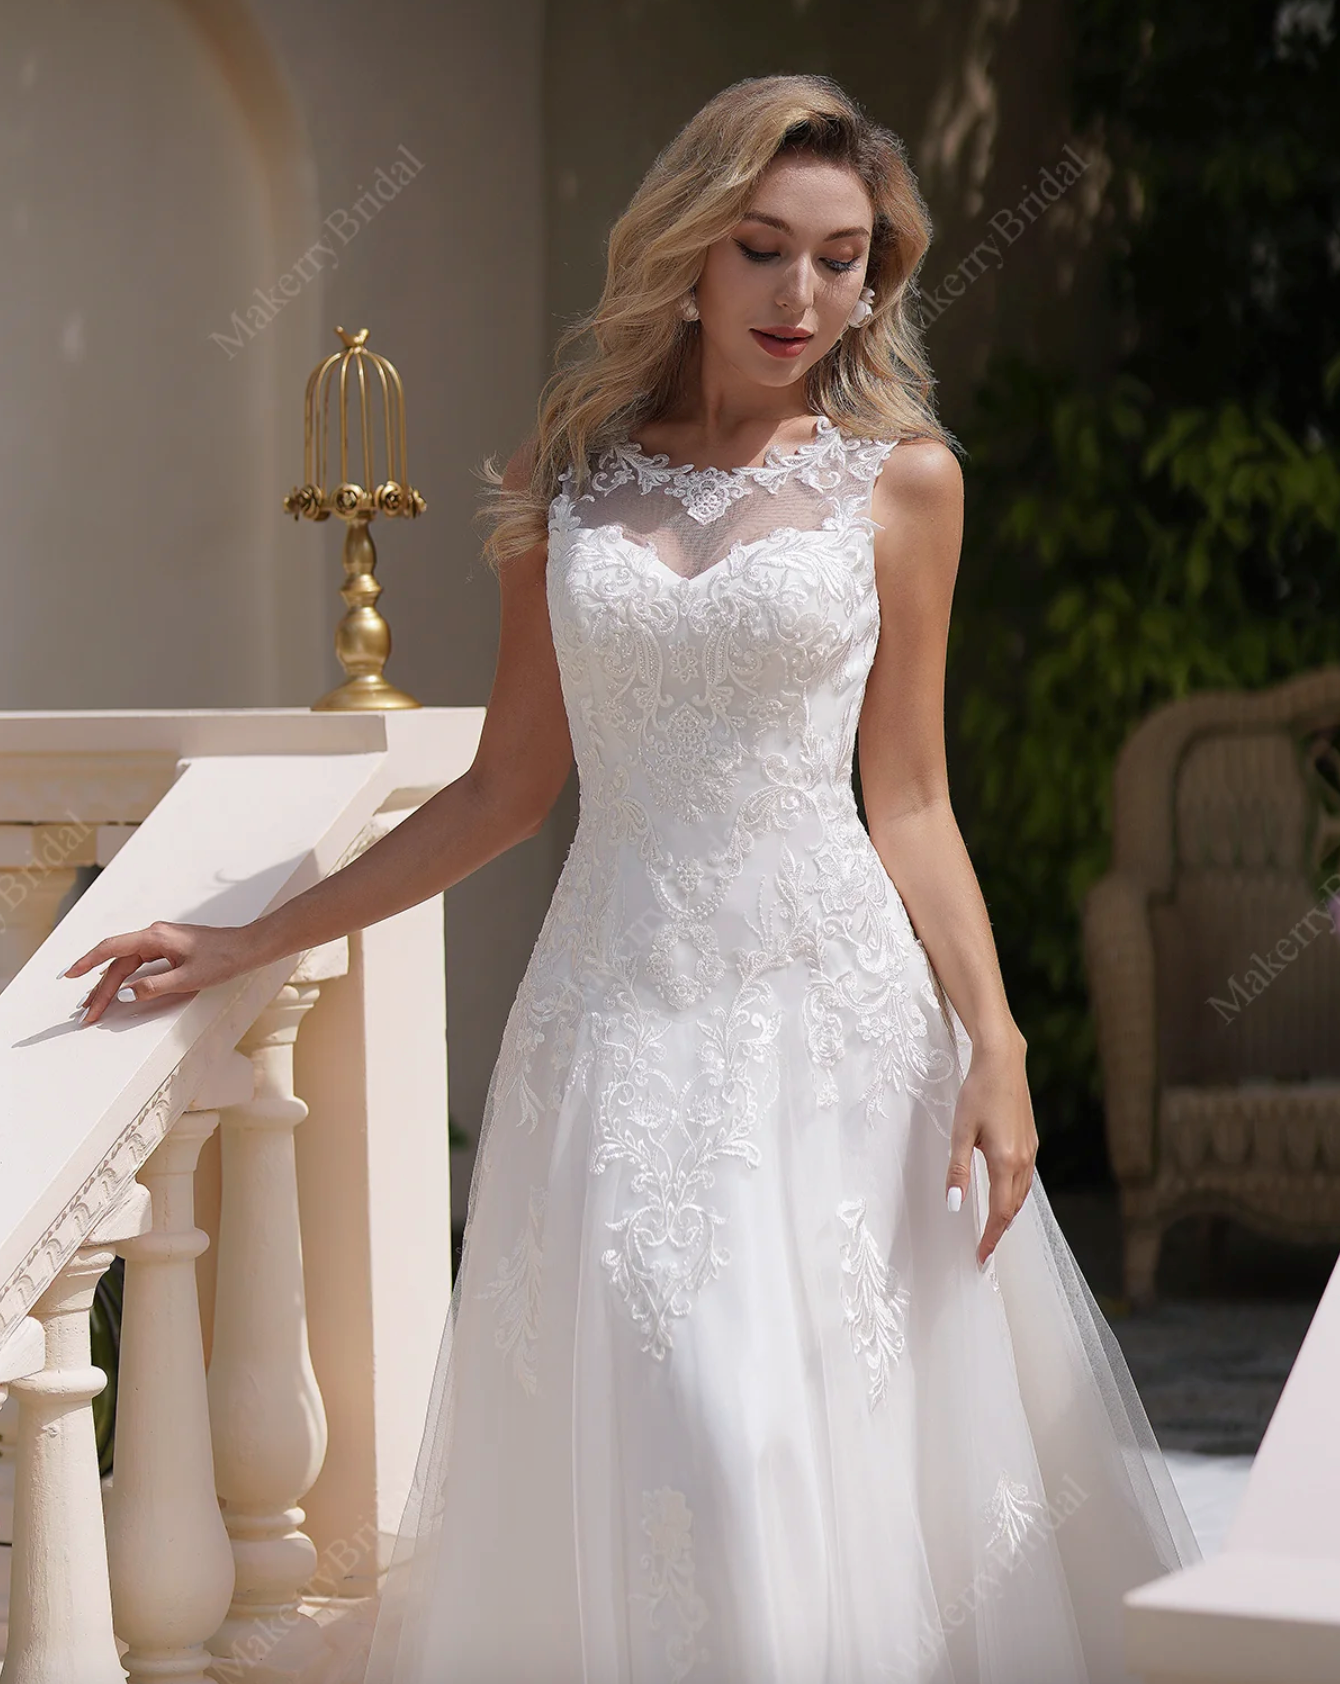 Soft Tulle A-Line Wedding Dress  Illusion Neckline And Sheer Back